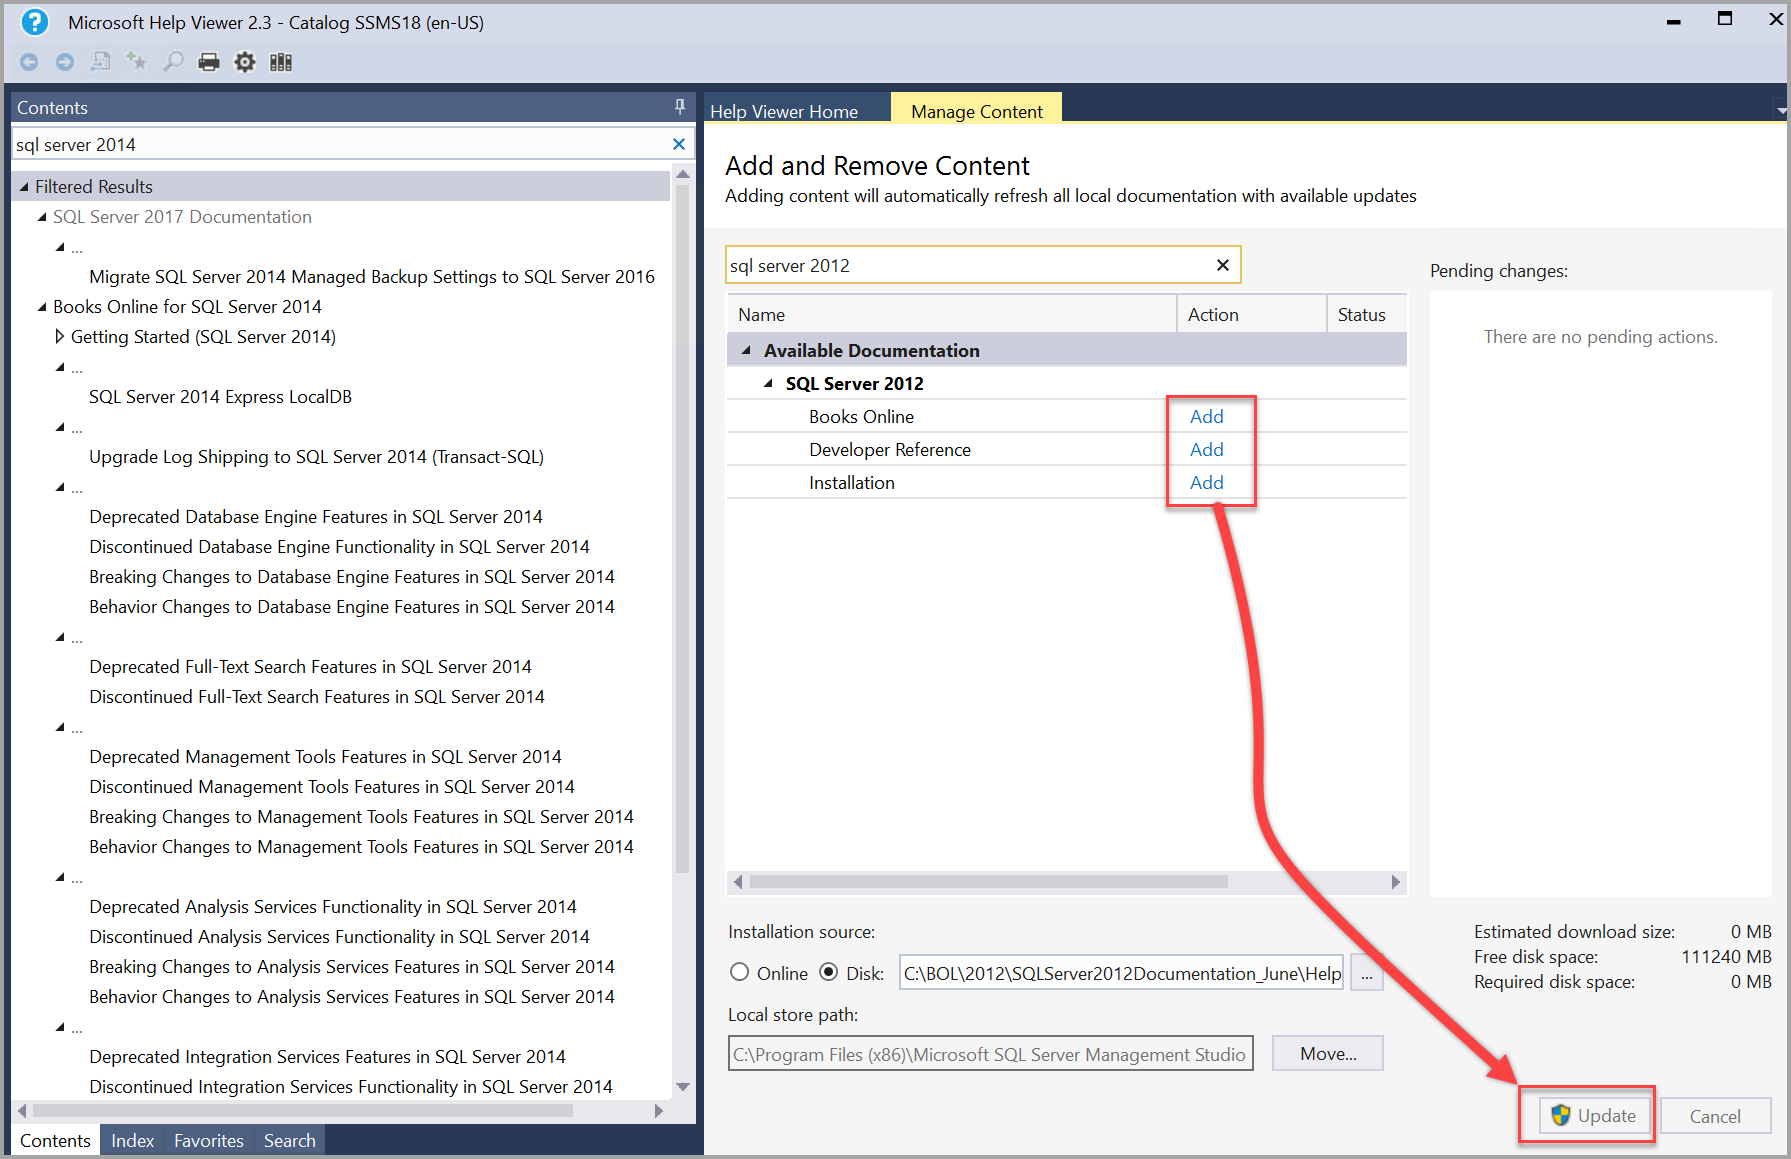 SQL Server 2012 books add and update in Help Viewer